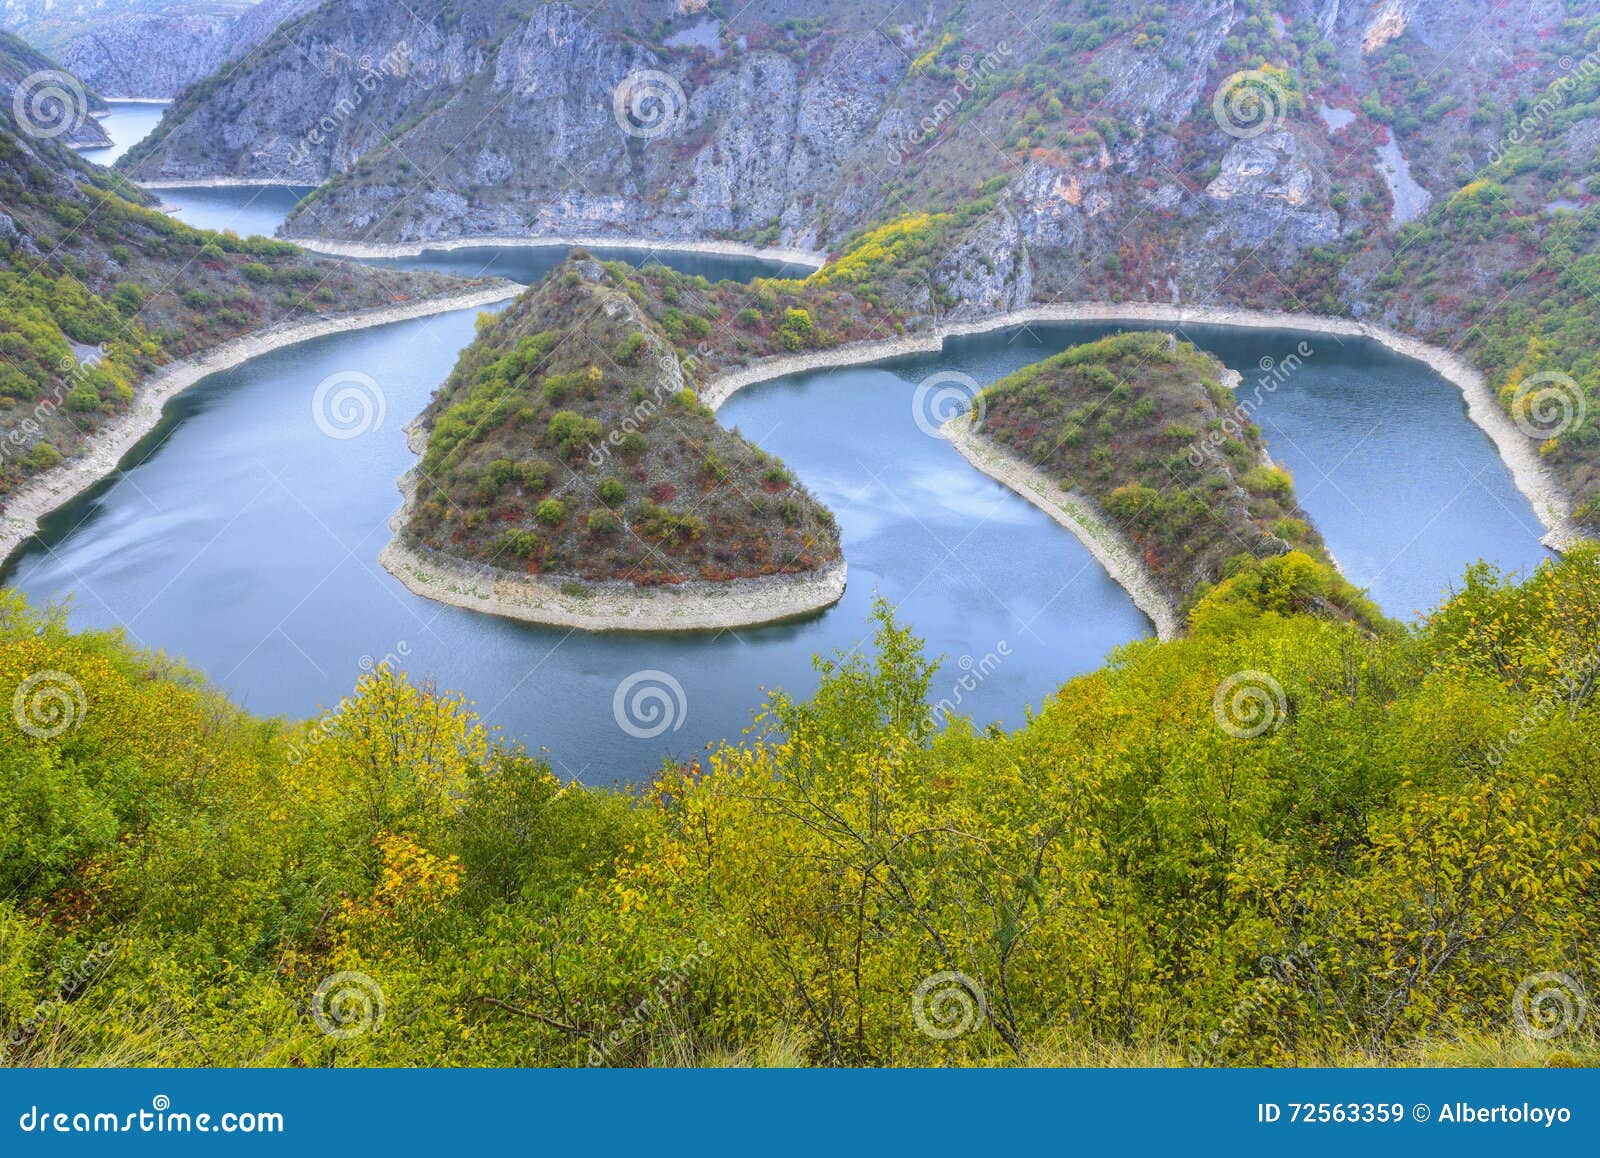 meander of the uvac river, serbia